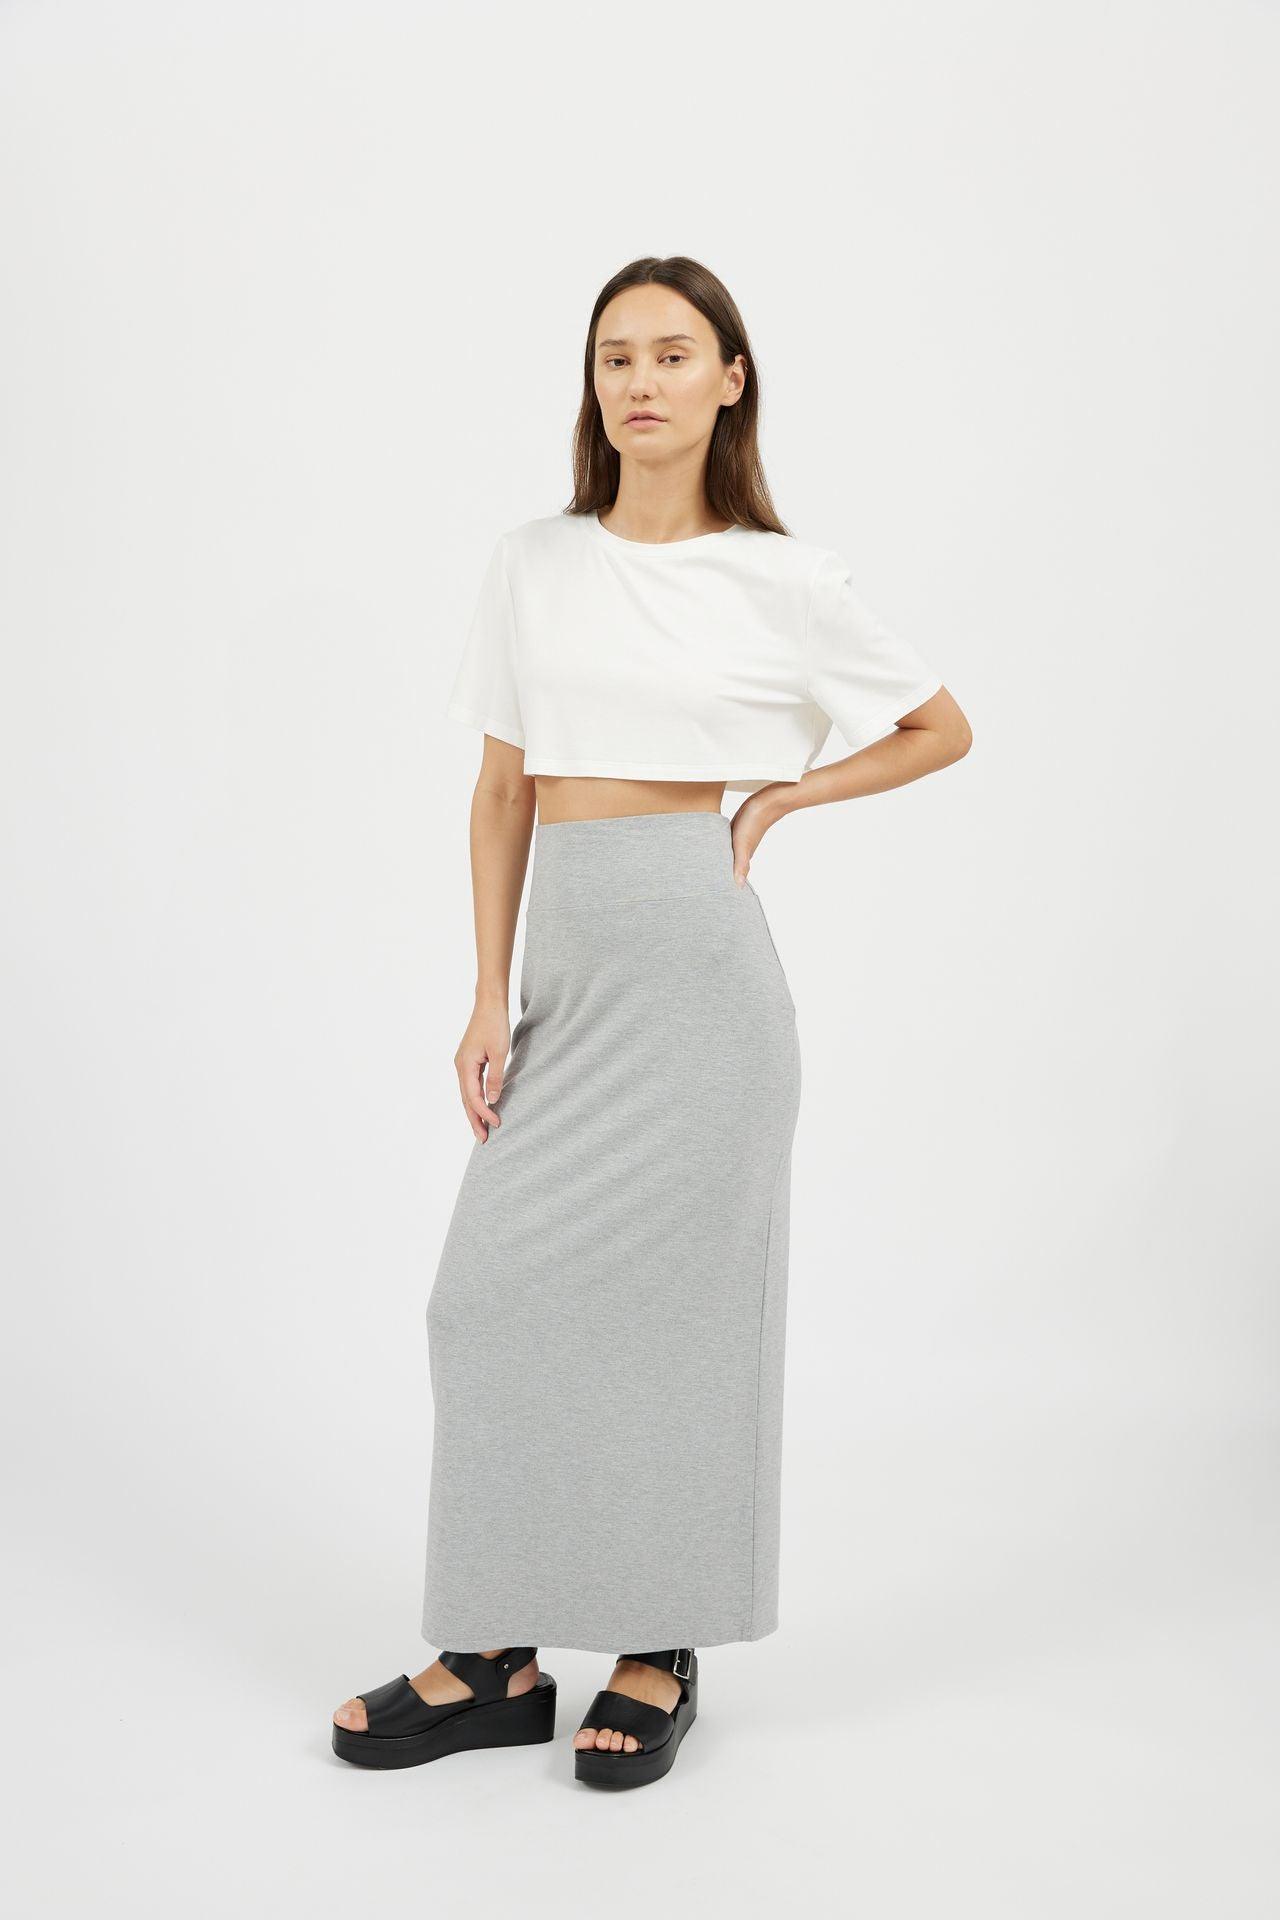 High Waisted Pencil Skirt – NOT LABELED